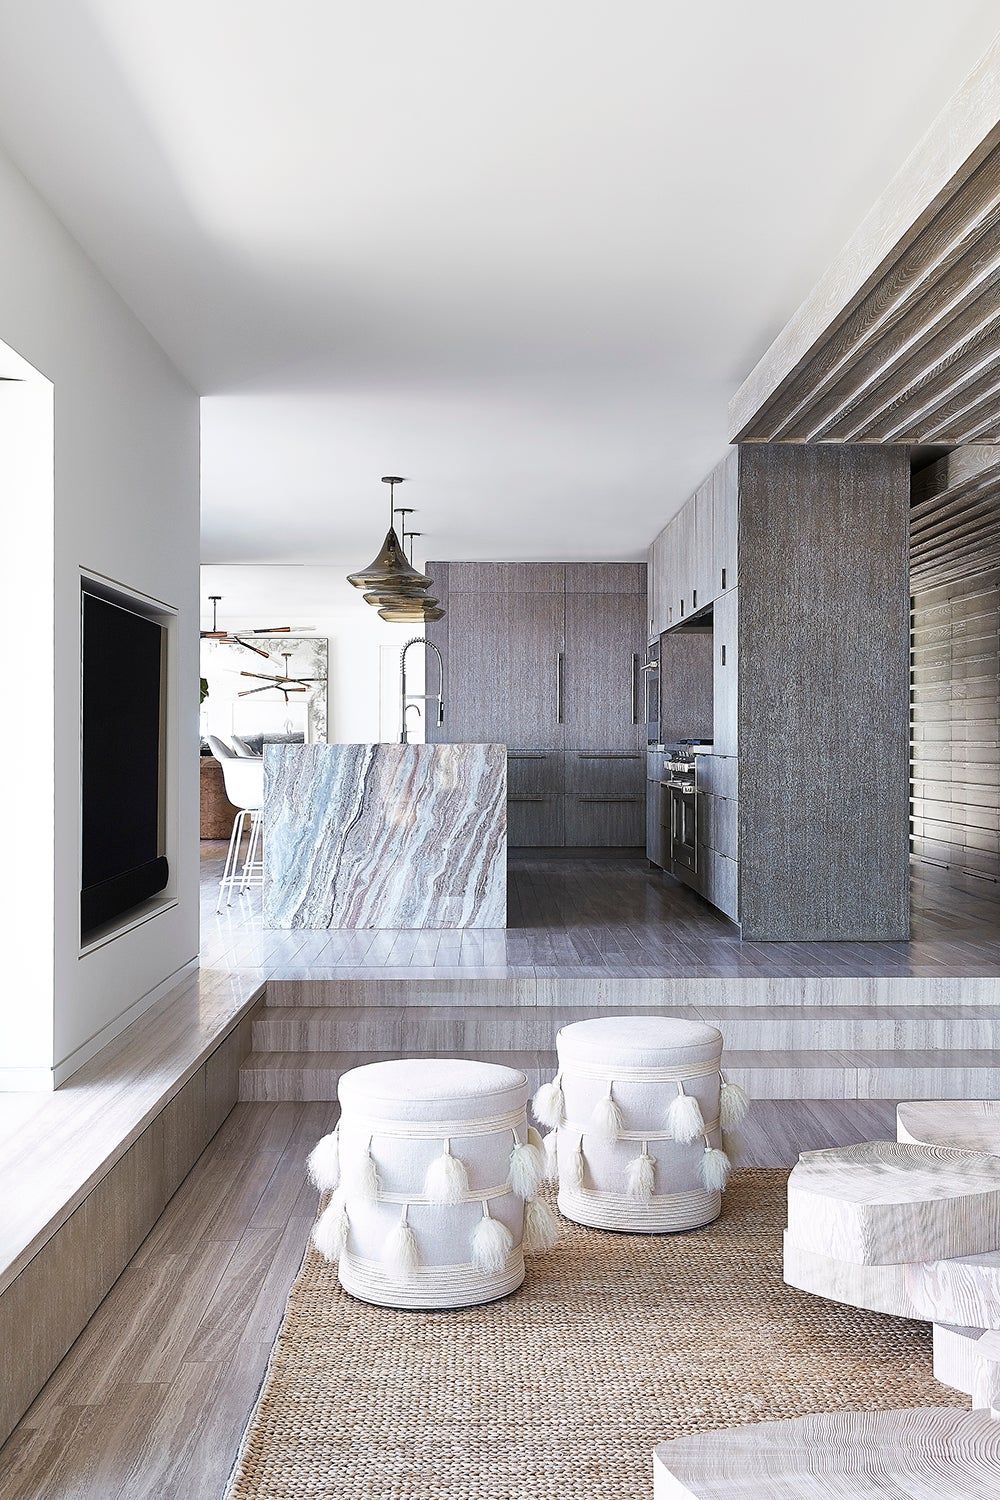 5 Ethereal Projects by Remarkable Interior Designers